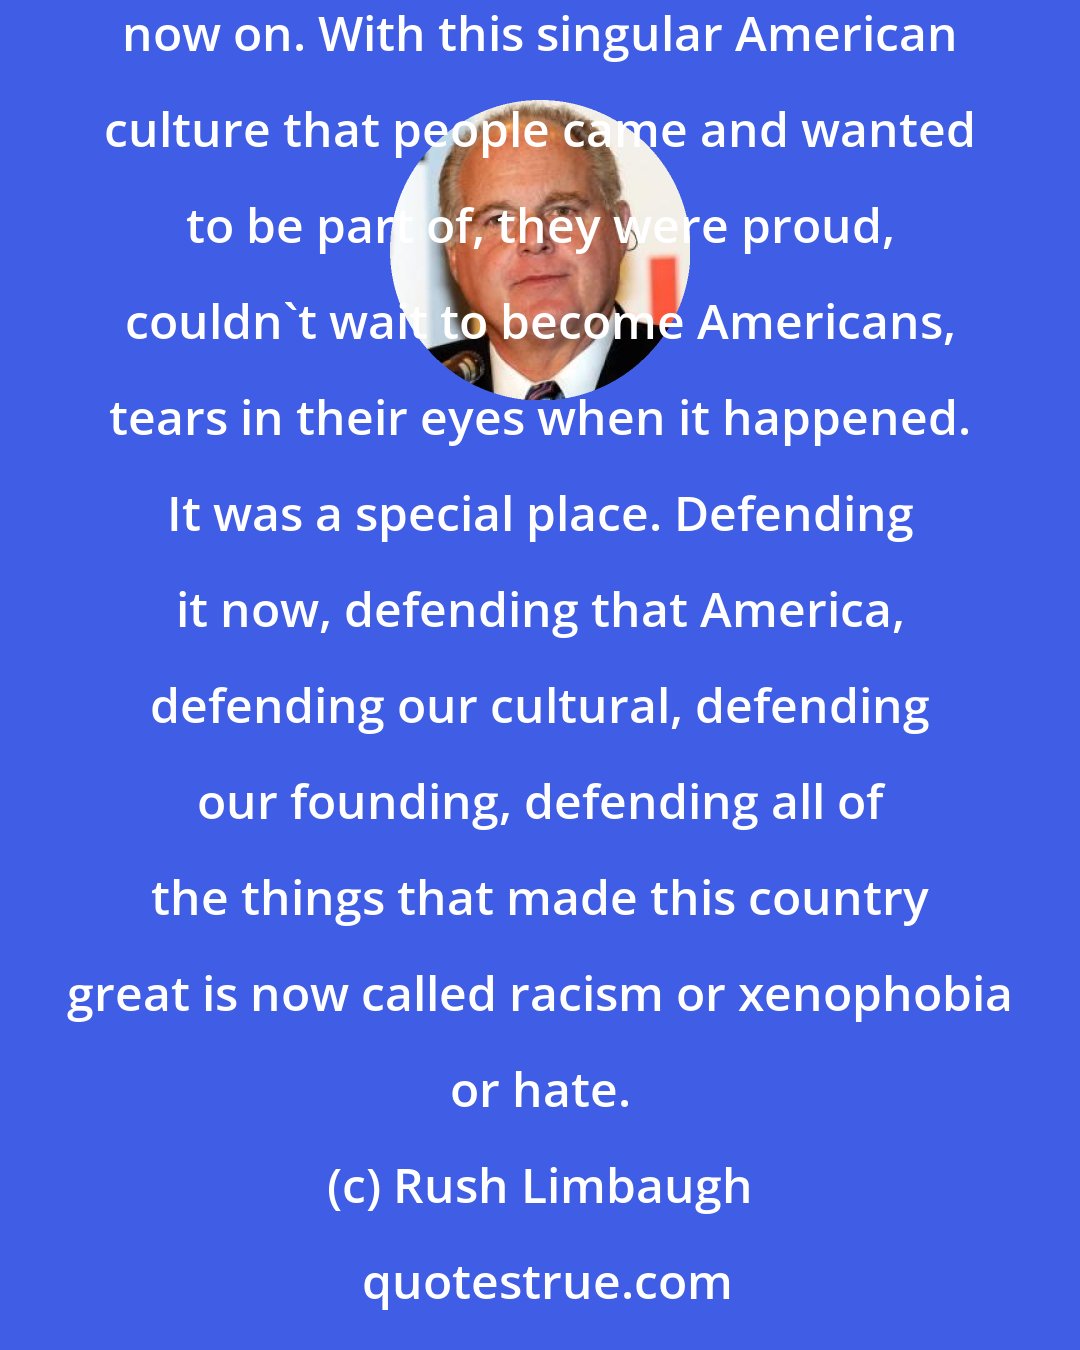 Rush Limbaugh: Diversity means, when the left teaches it, the people responsible for building America and maintaining it get the short end of the stick from now on. With this singular American culture that people came and wanted to be part of, they were proud, couldn't wait to become Americans, tears in their eyes when it happened. It was a special place. Defending it now, defending that America, defending our cultural, defending our founding, defending all of the things that made this country great is now called racism or xenophobia or hate.